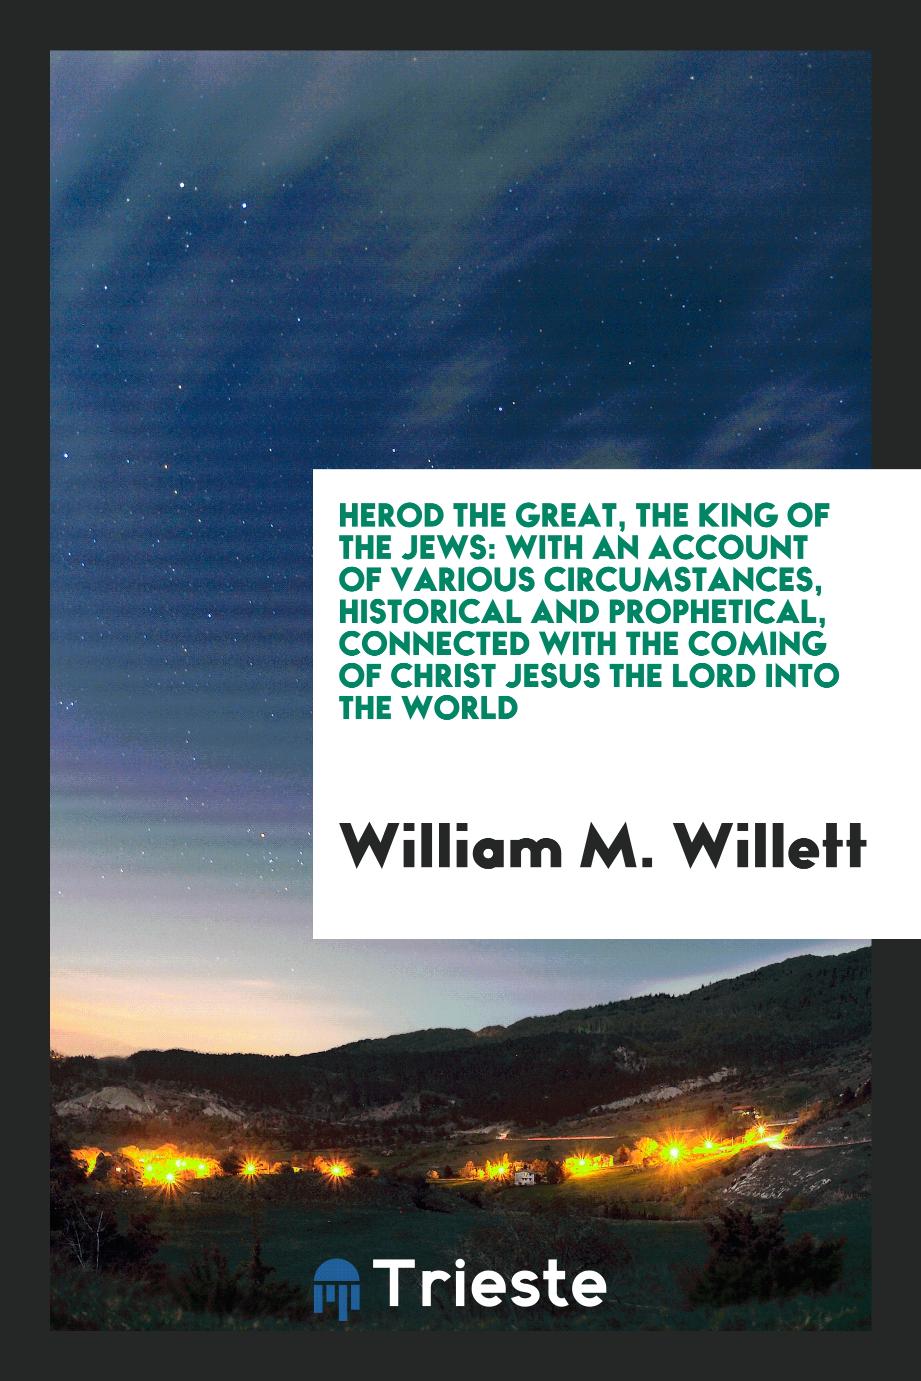 Herod the Great, the King of the Jews: With an Account of Various Circumstances, Historical and prophetical, connected with the coming of Christ Jesus the Lord into the world